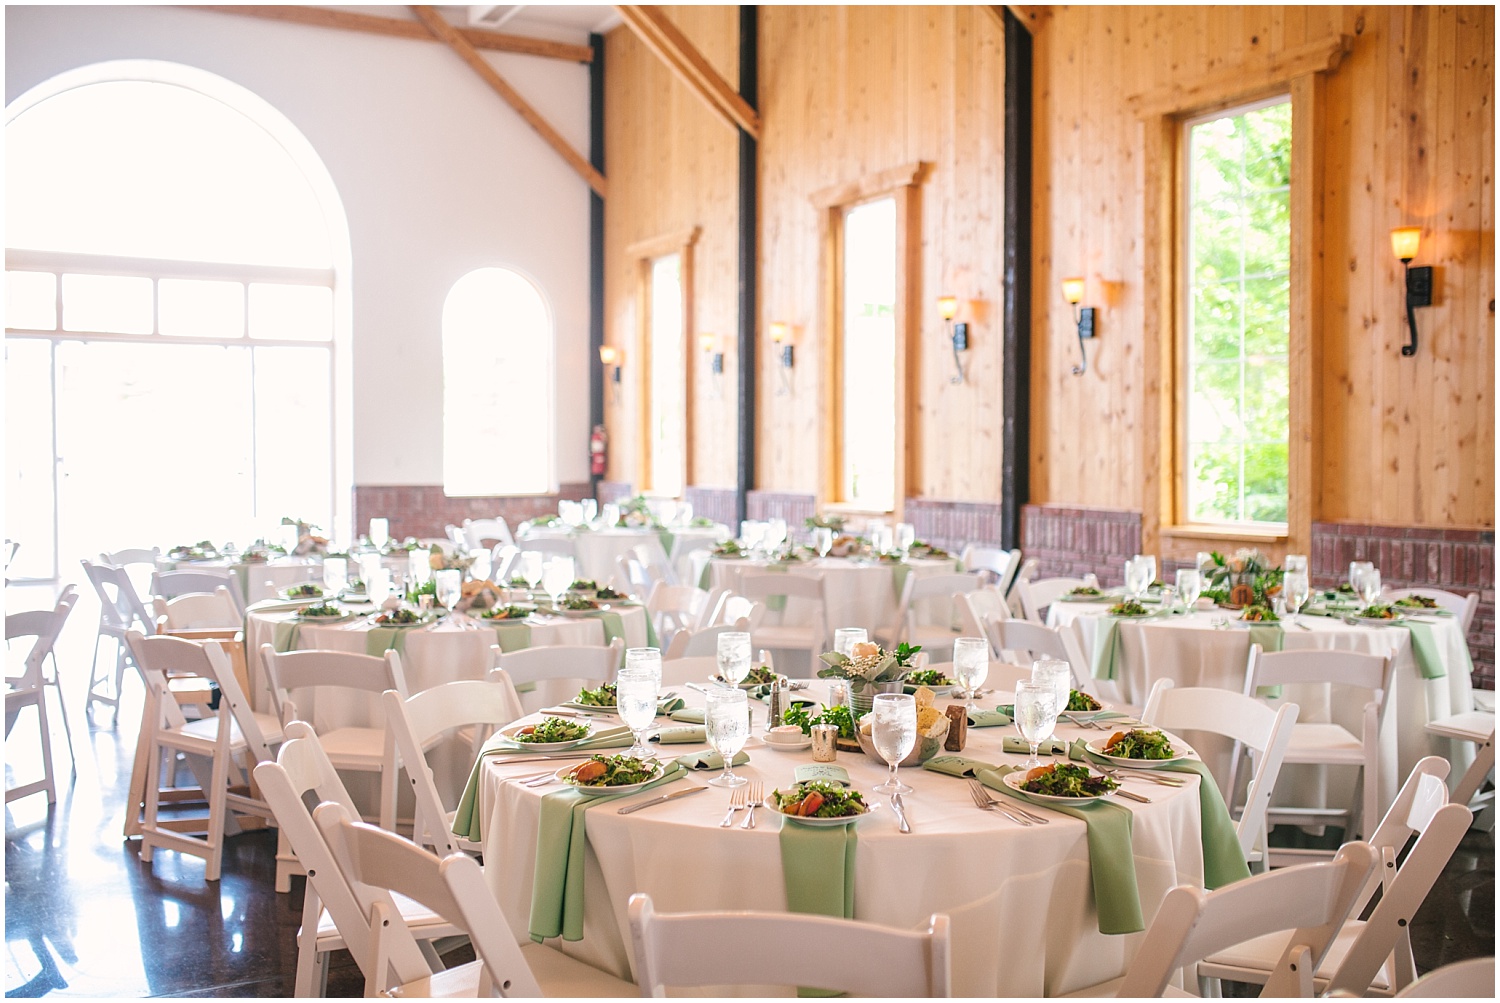 Wood table numbers with white flowers and greenery as centerpieces at Crooked Willow Farms wedding